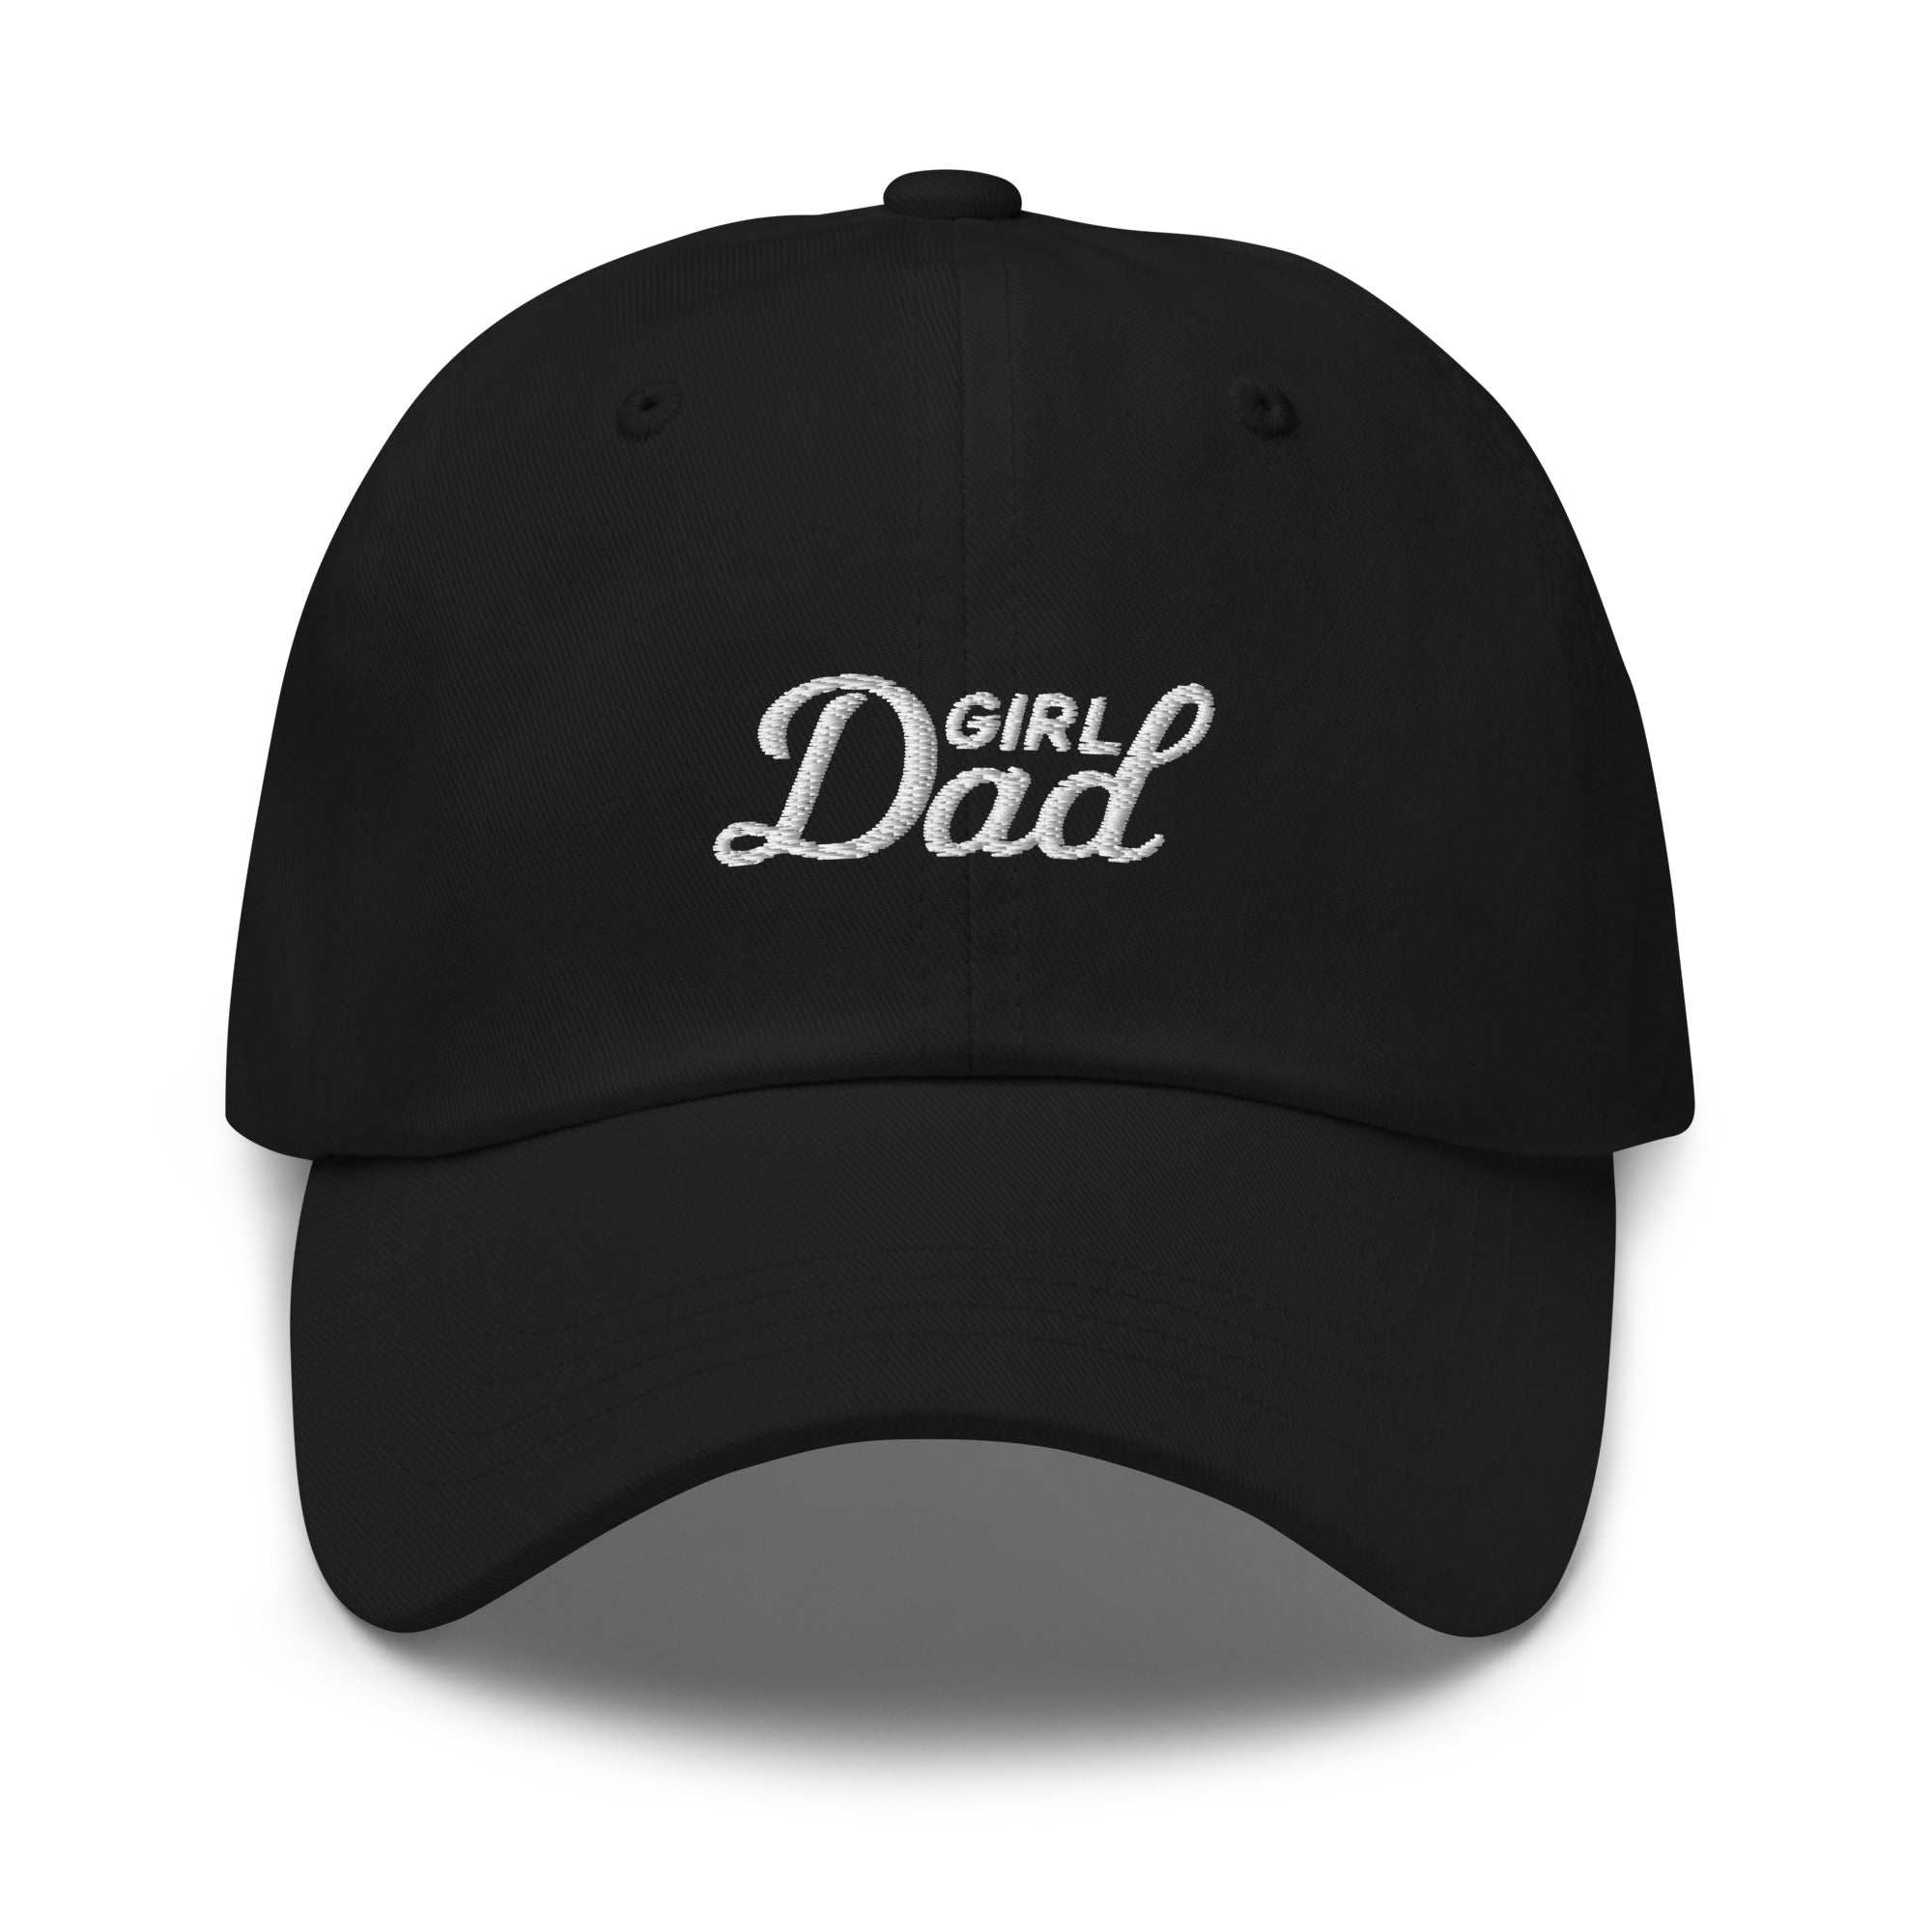 Girl Dad Hat-Hats-Bussin With The Boys-Black-Barstool Sports